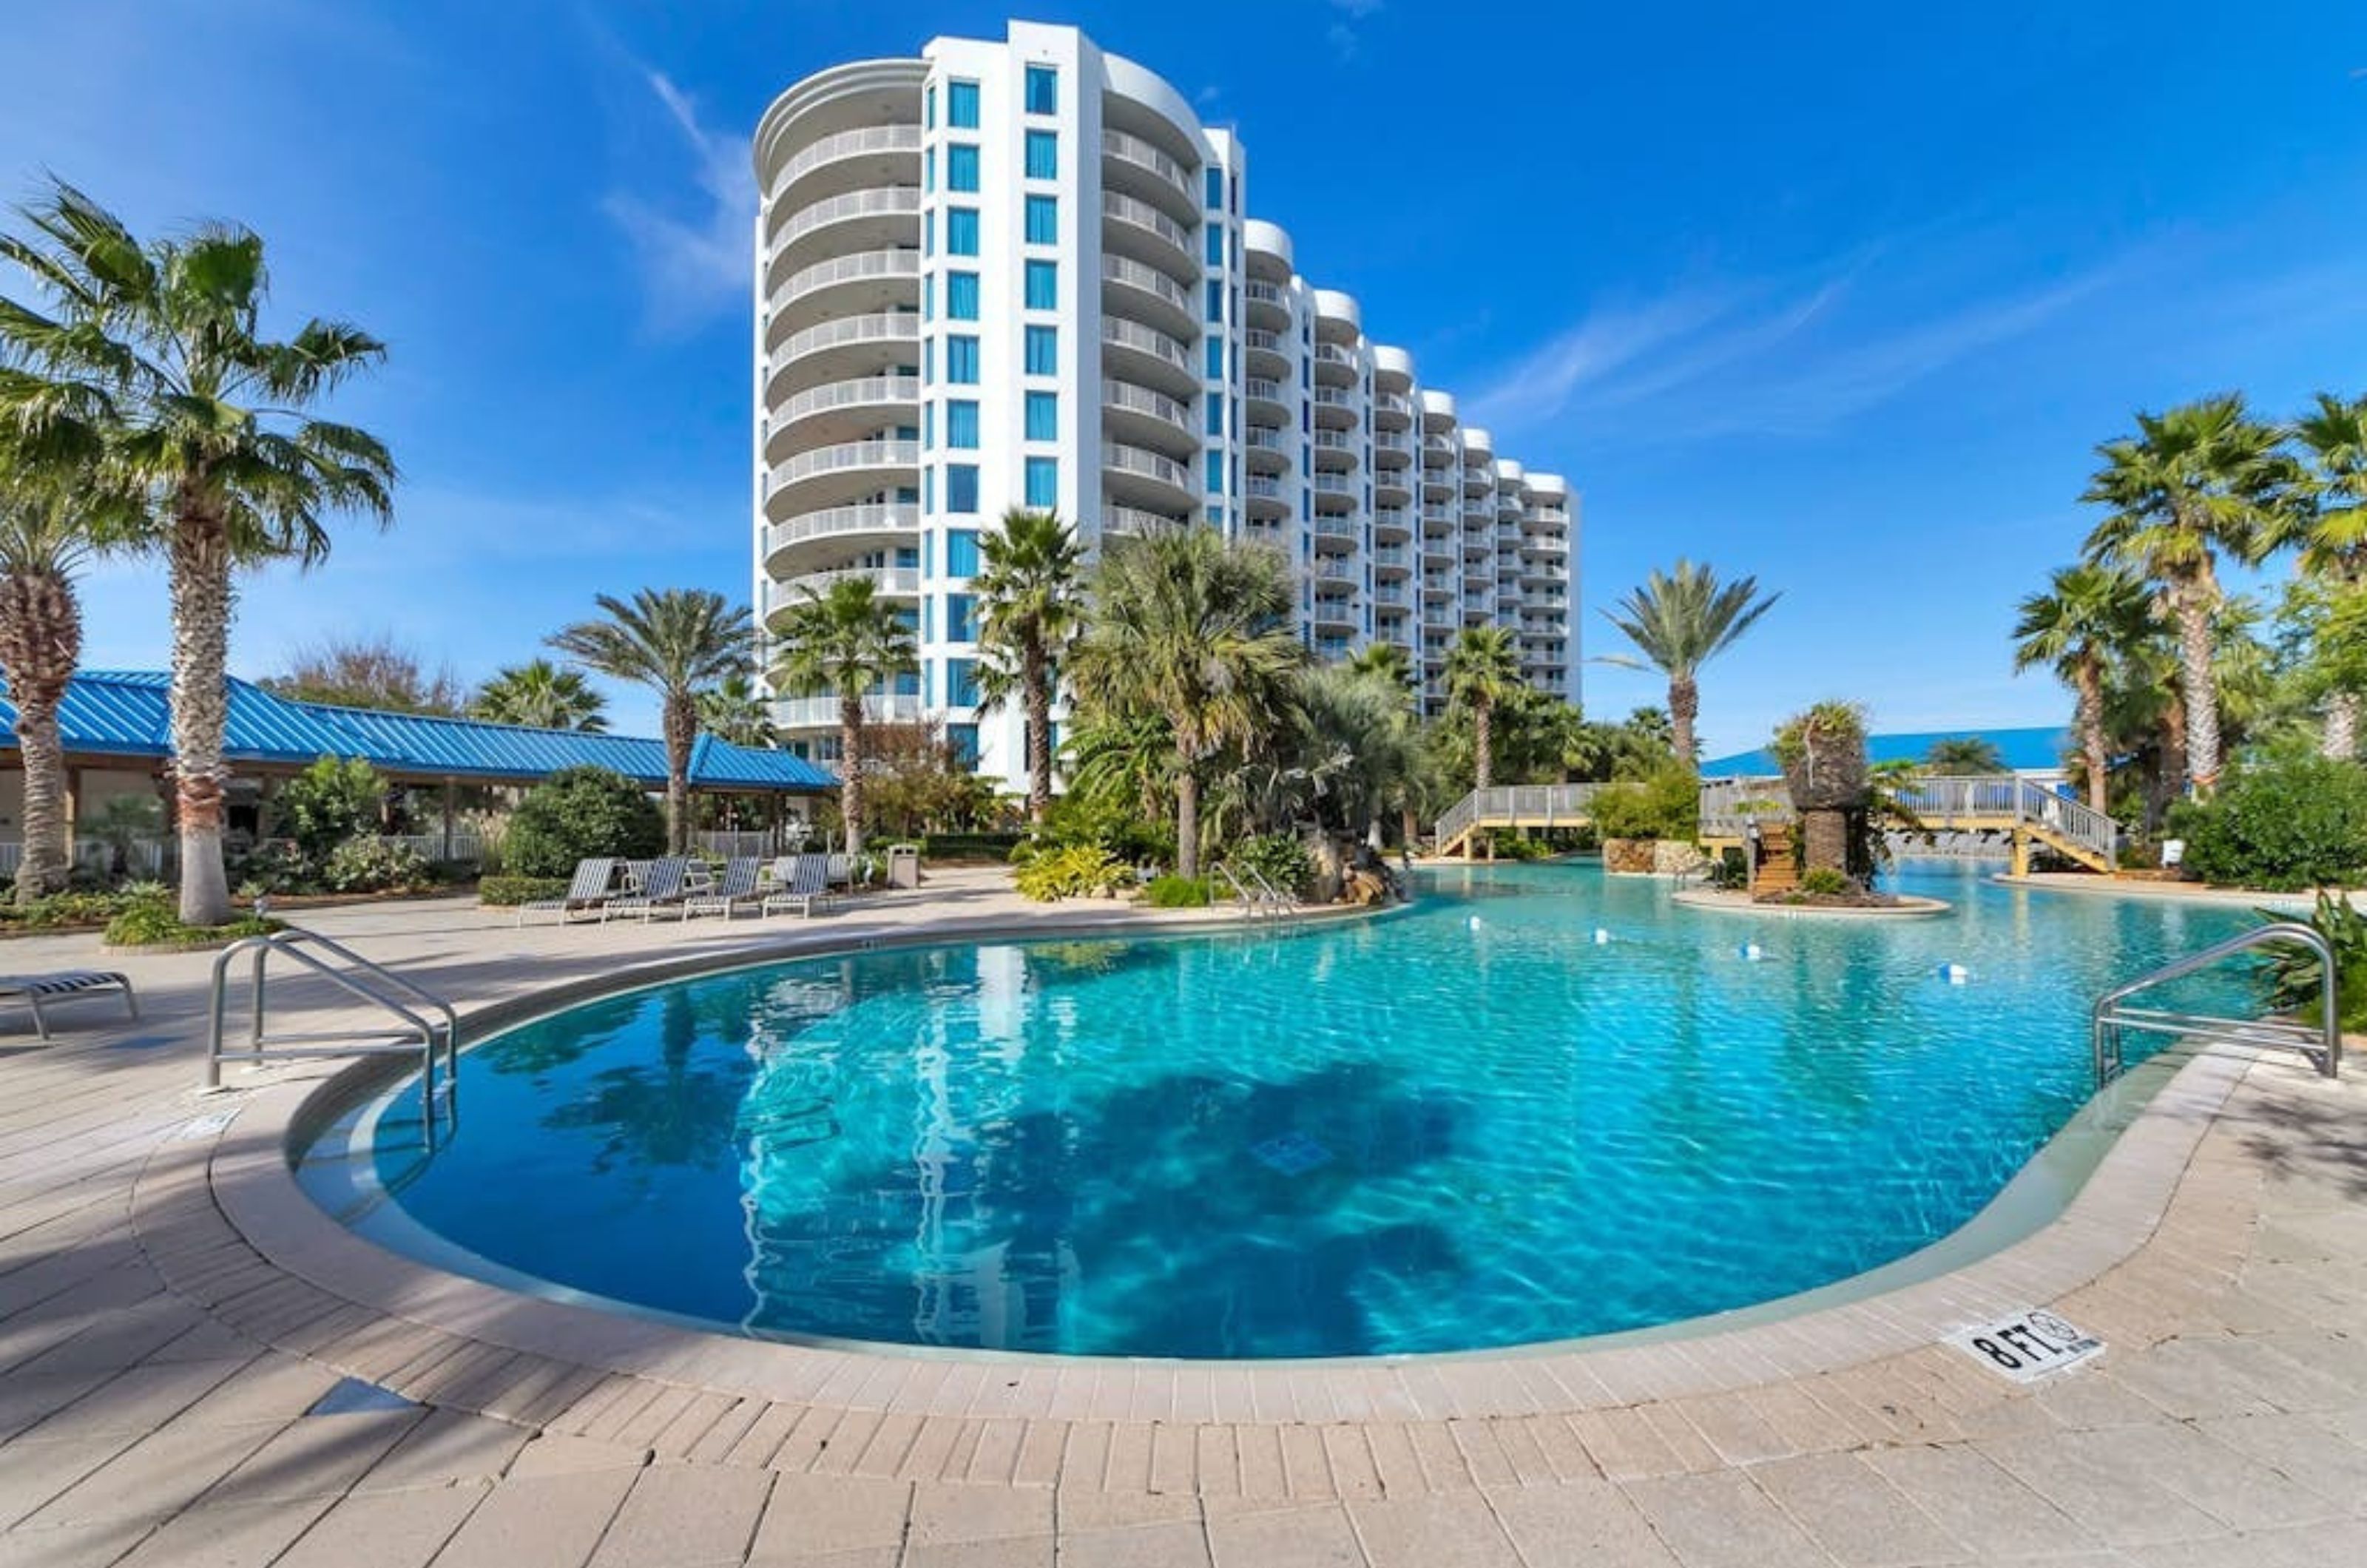 The large pool in front of  the Palms of Destin in Destin Florida 